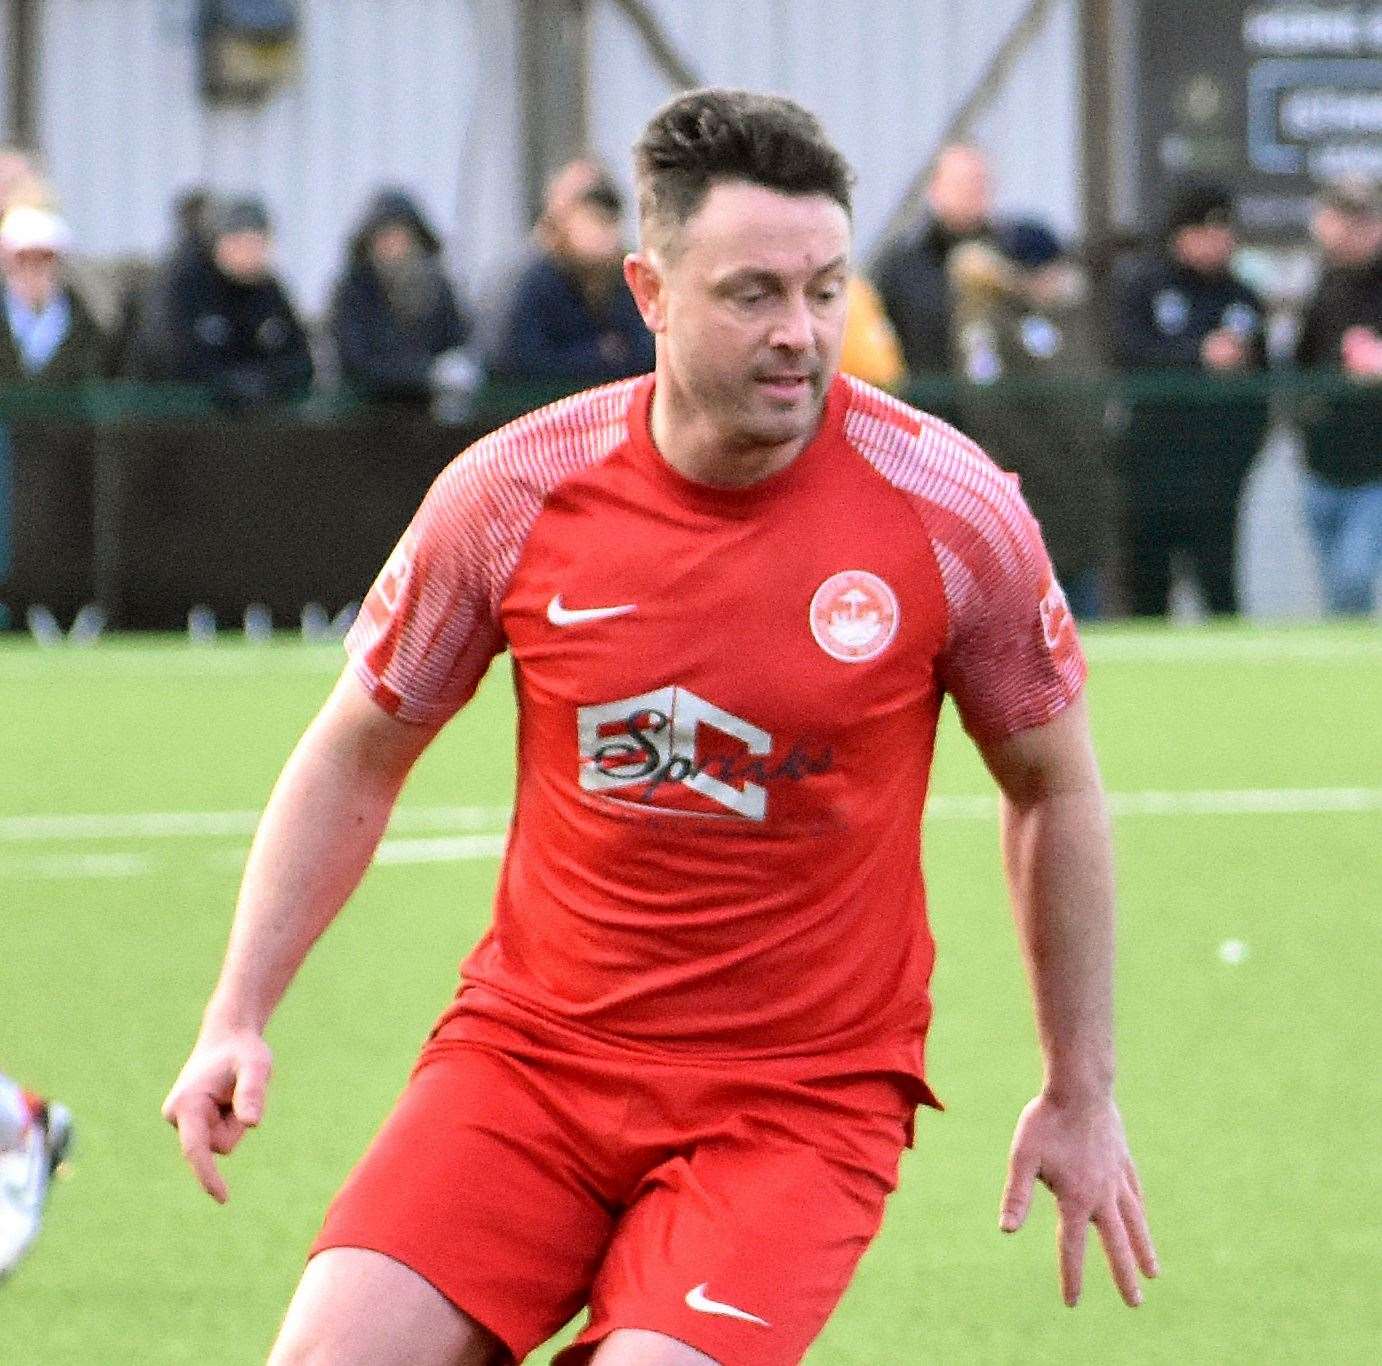 Player-coach Frannie Collin – converted a late penalty in Hythe’s 1-1 weekend draw with Three Bridges. Picture: Randolph File